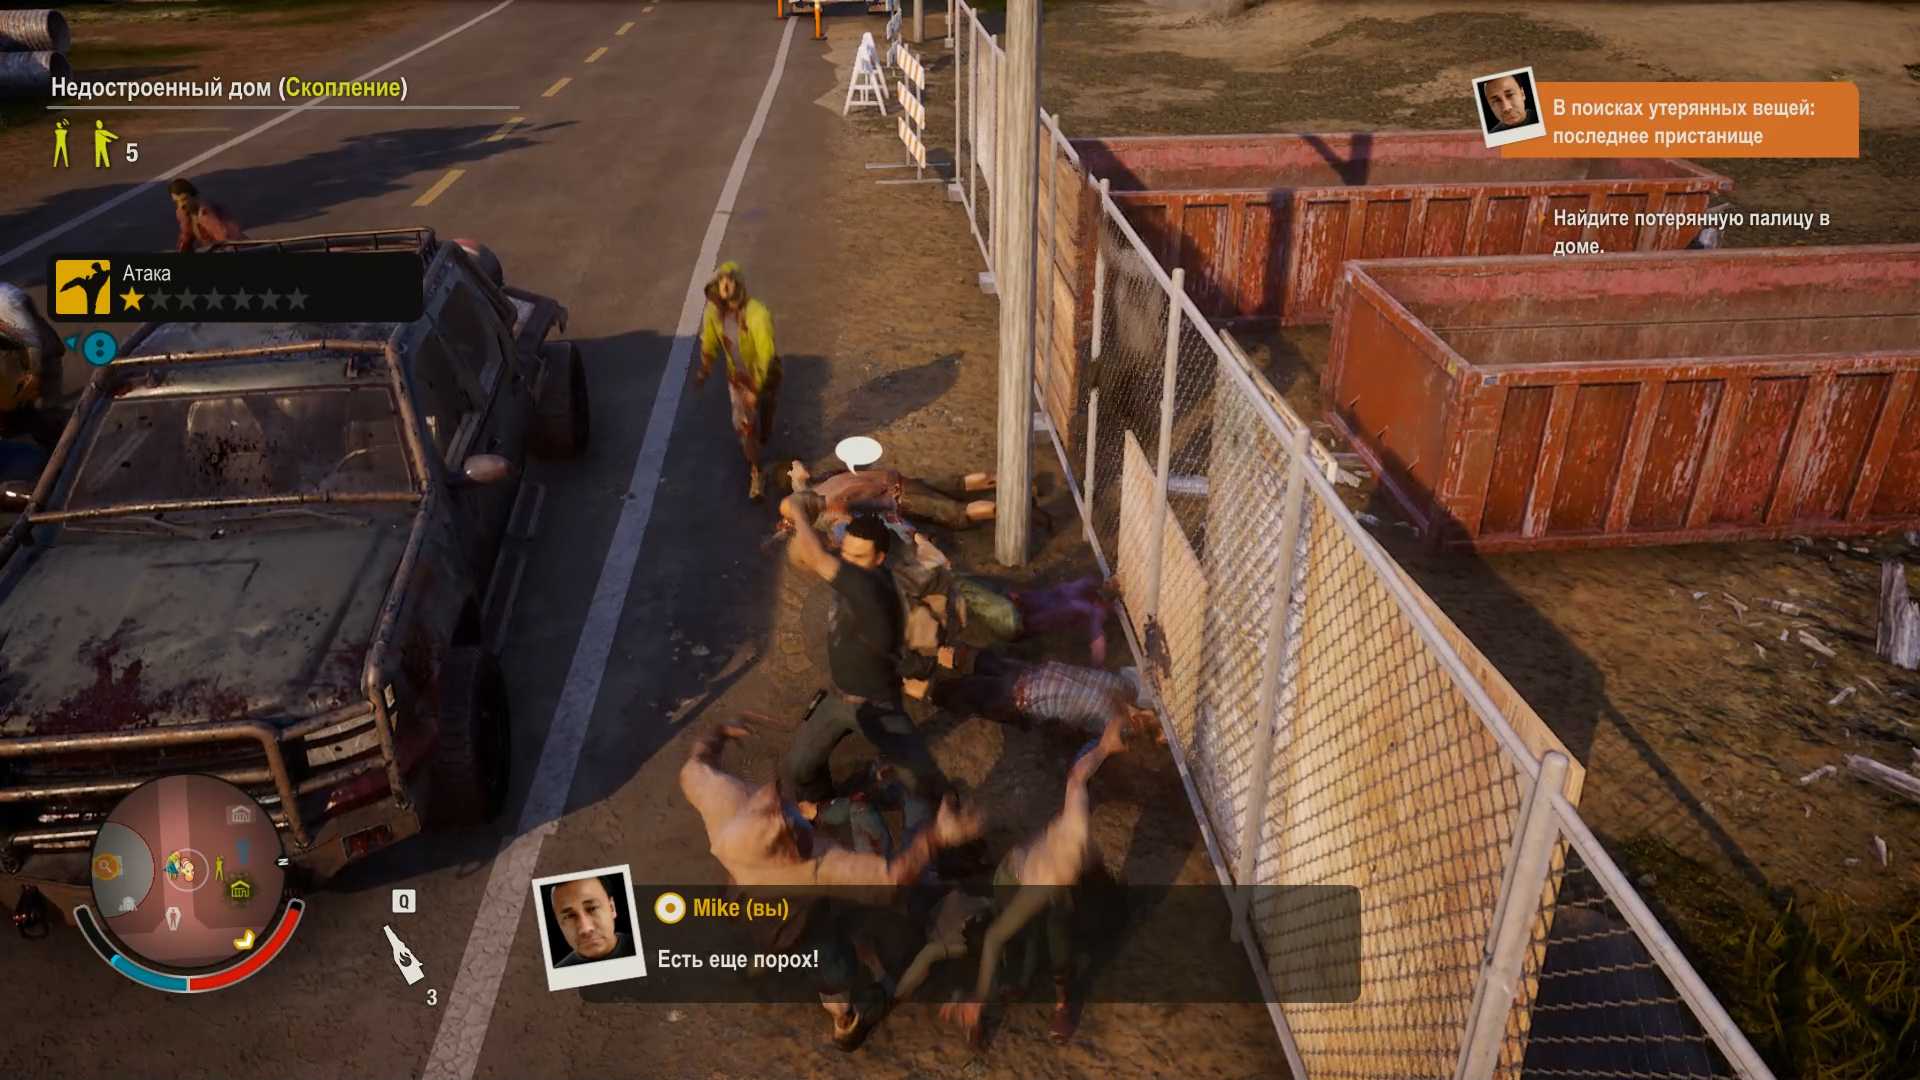 State of decay требования. Игра State of Decay 2. Игра State of Decay 2 геймплей. State of Decay 2 кооператив.